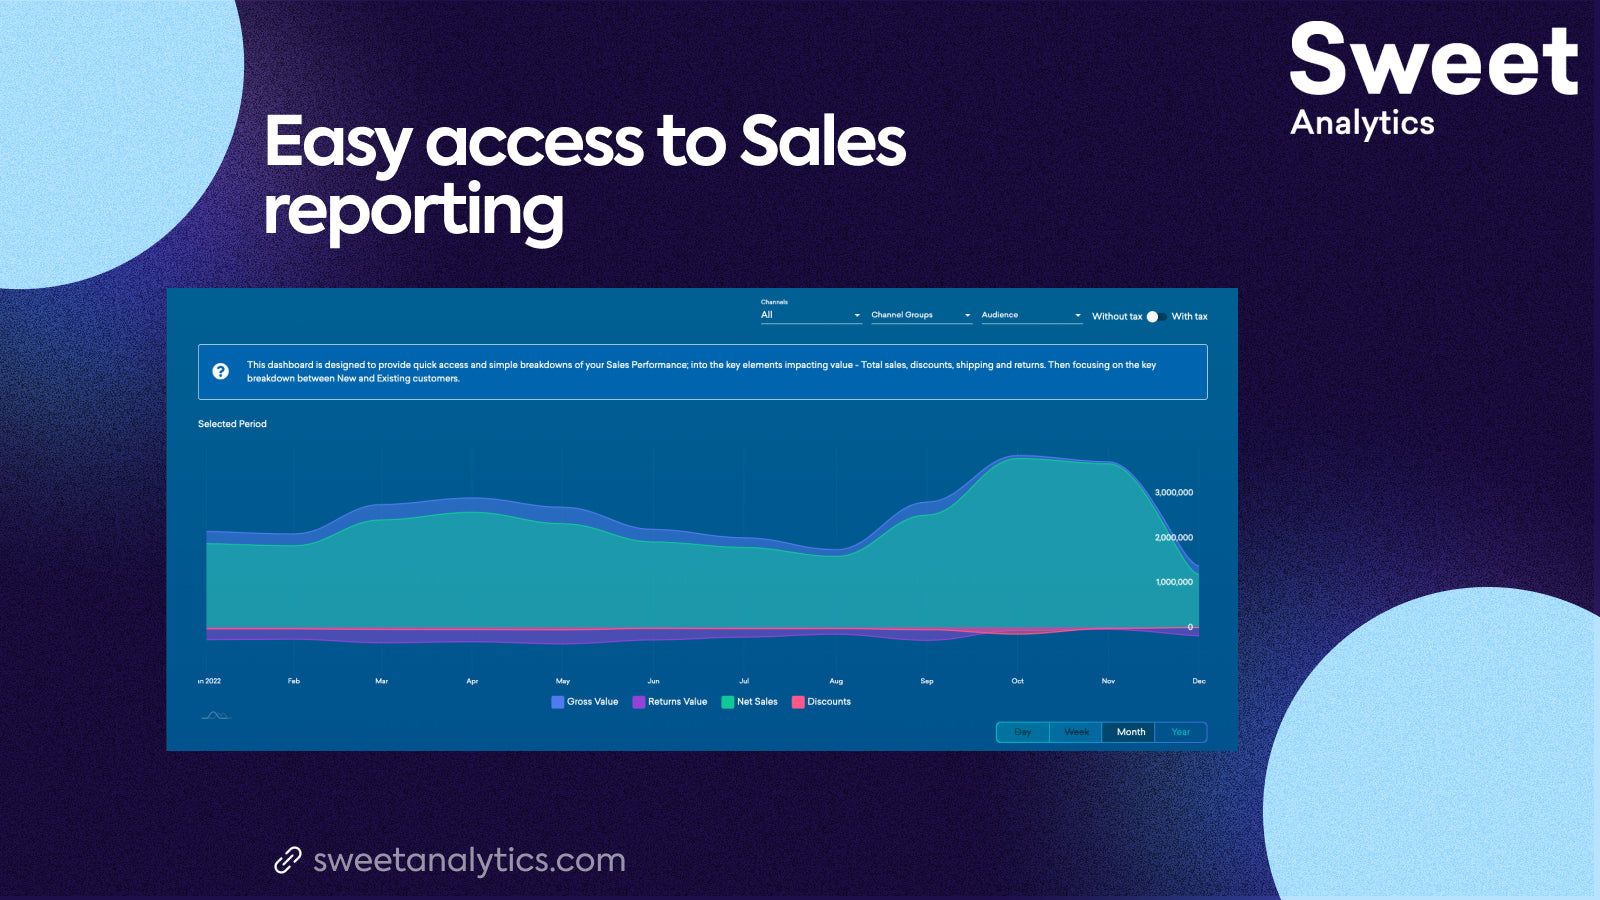 Sweet Analytics offers sales reporting built for retail